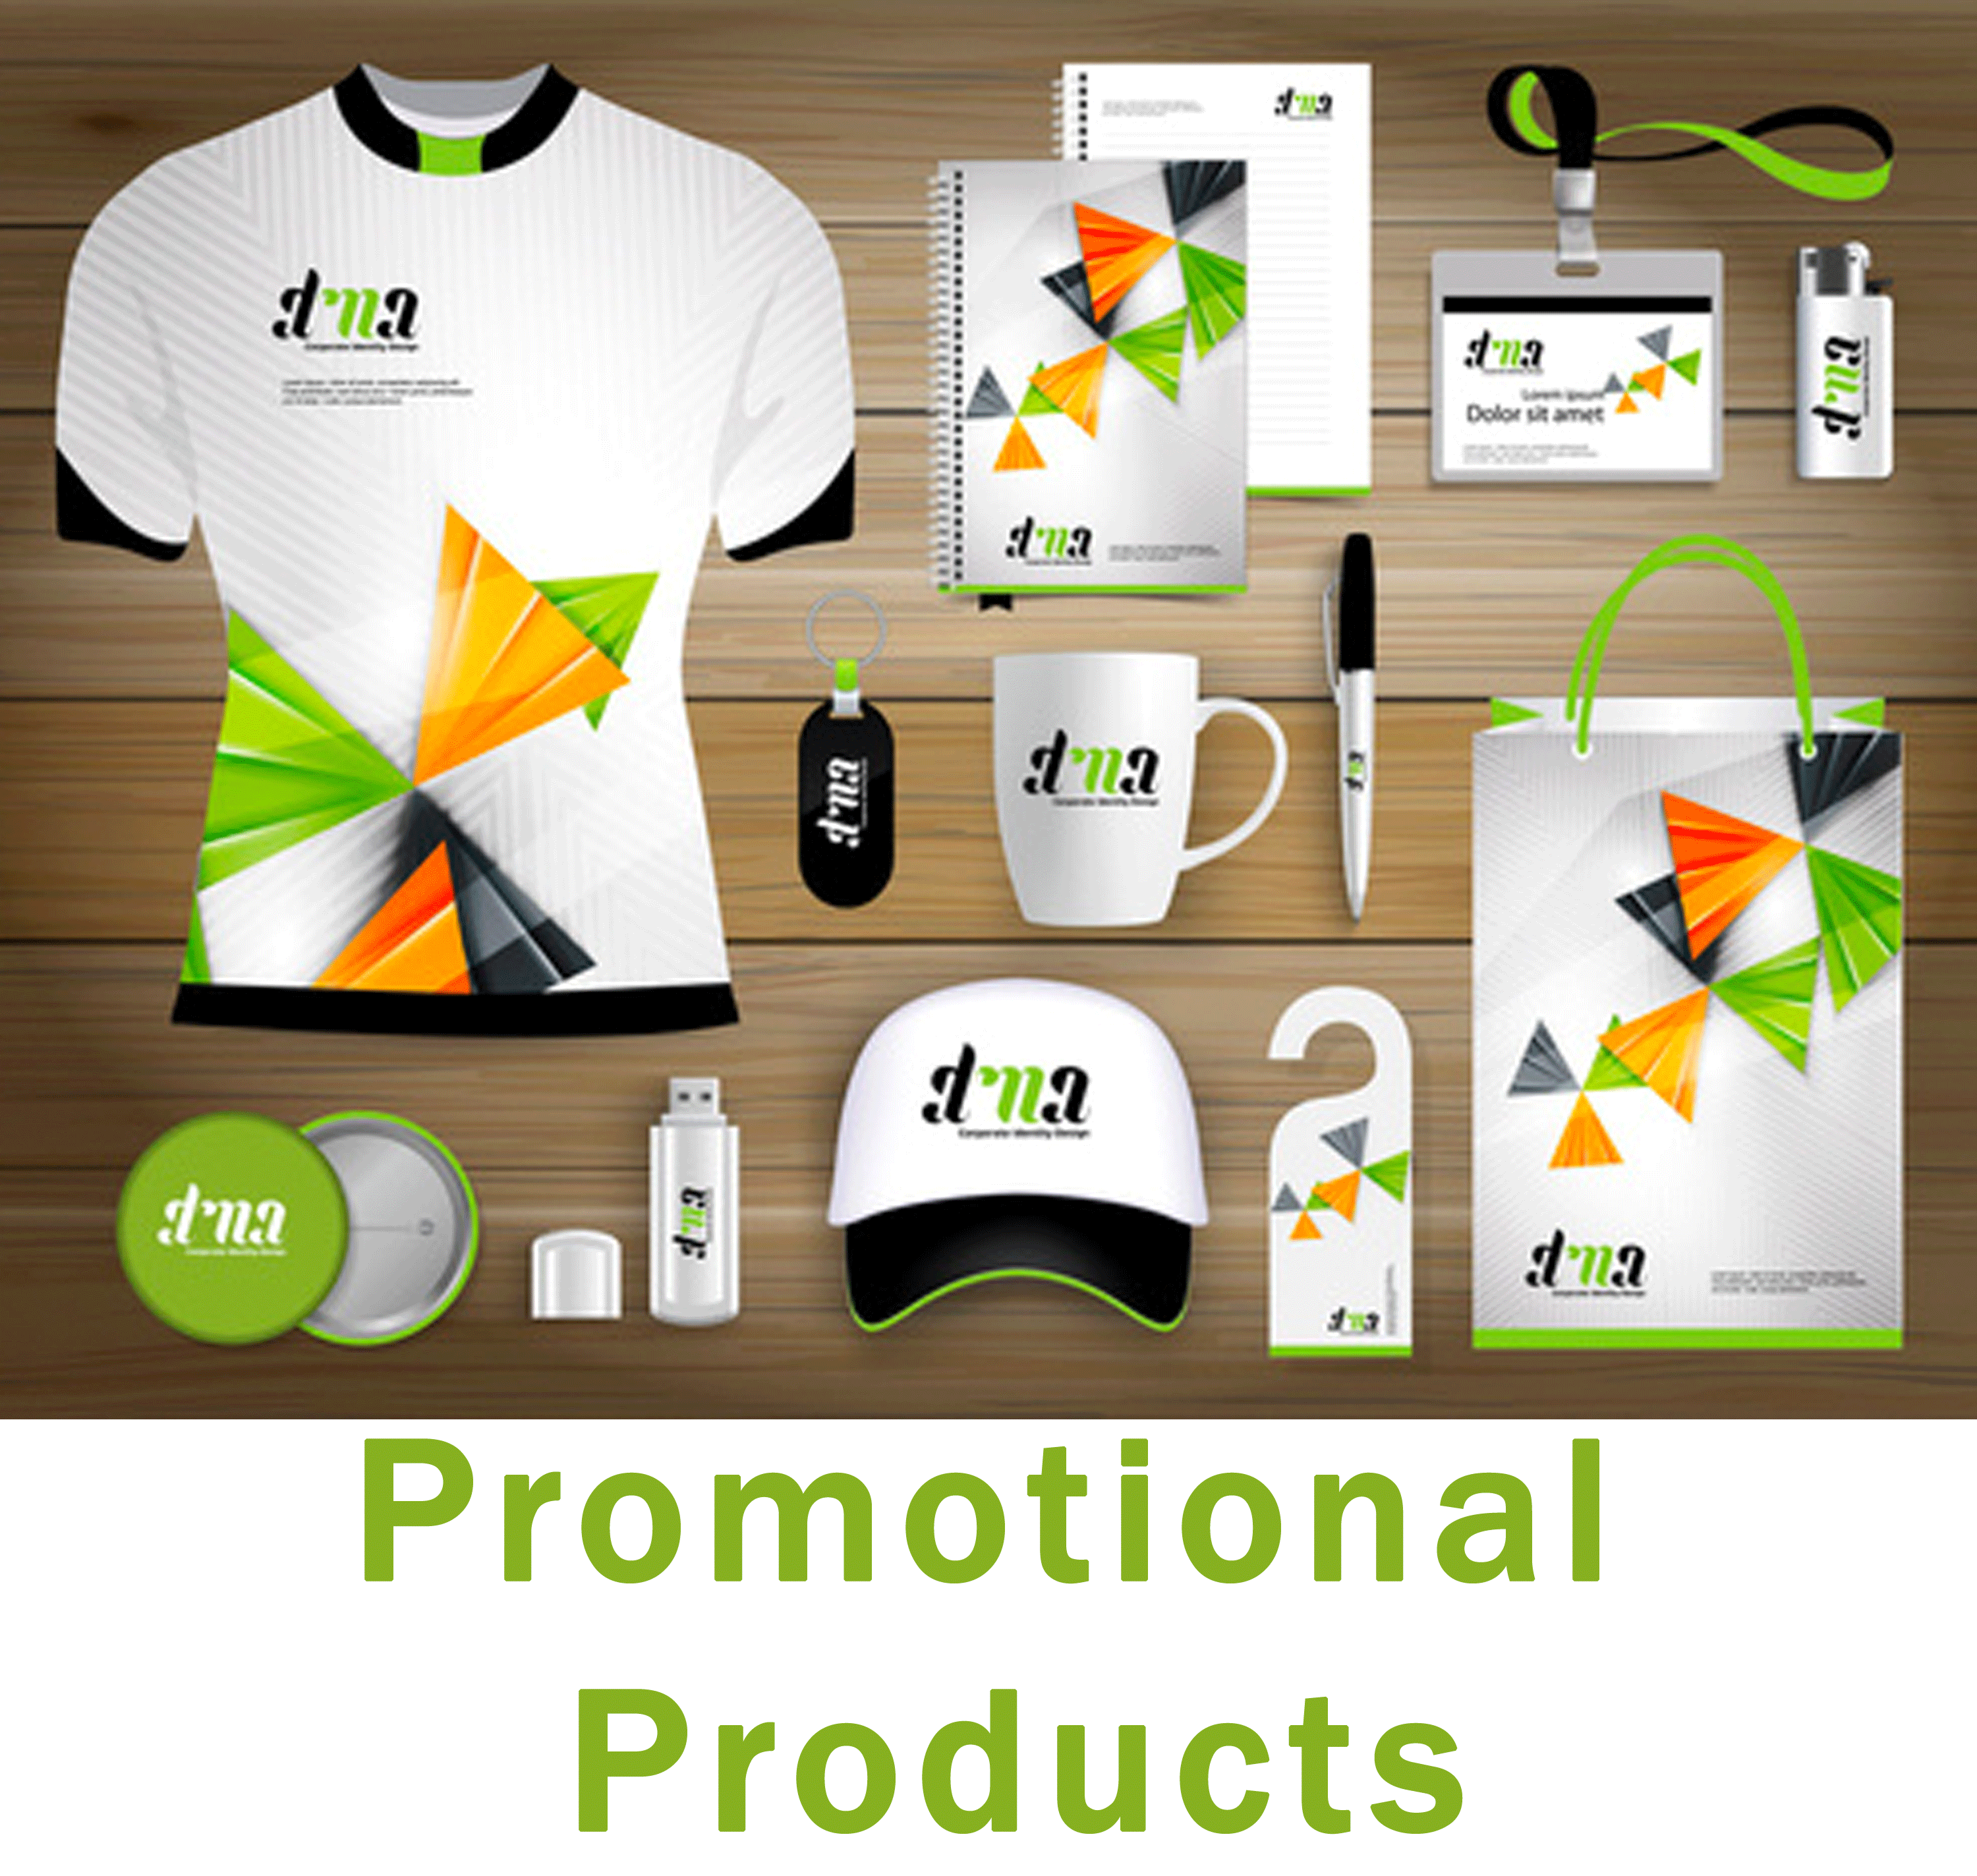 Popular Promotional Items - Exousia Marketing Group